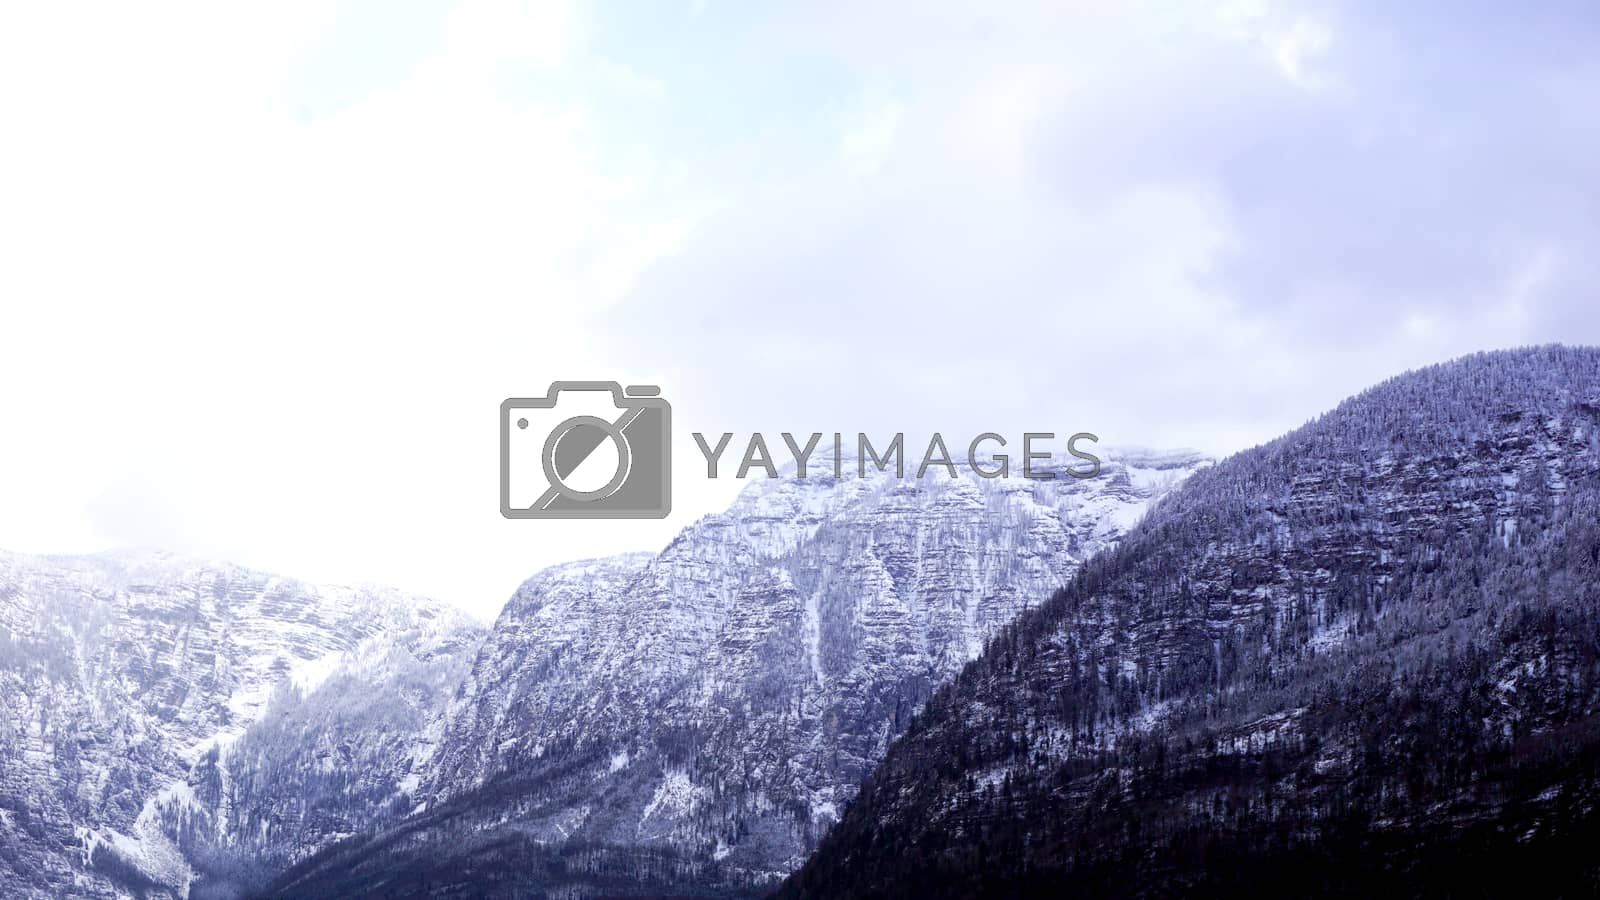 Royalty free image of Hallstatt dreamscape winter snow mountain landscape outdoor adventure with blue sky in snowy day, Austria by polarbearstudio